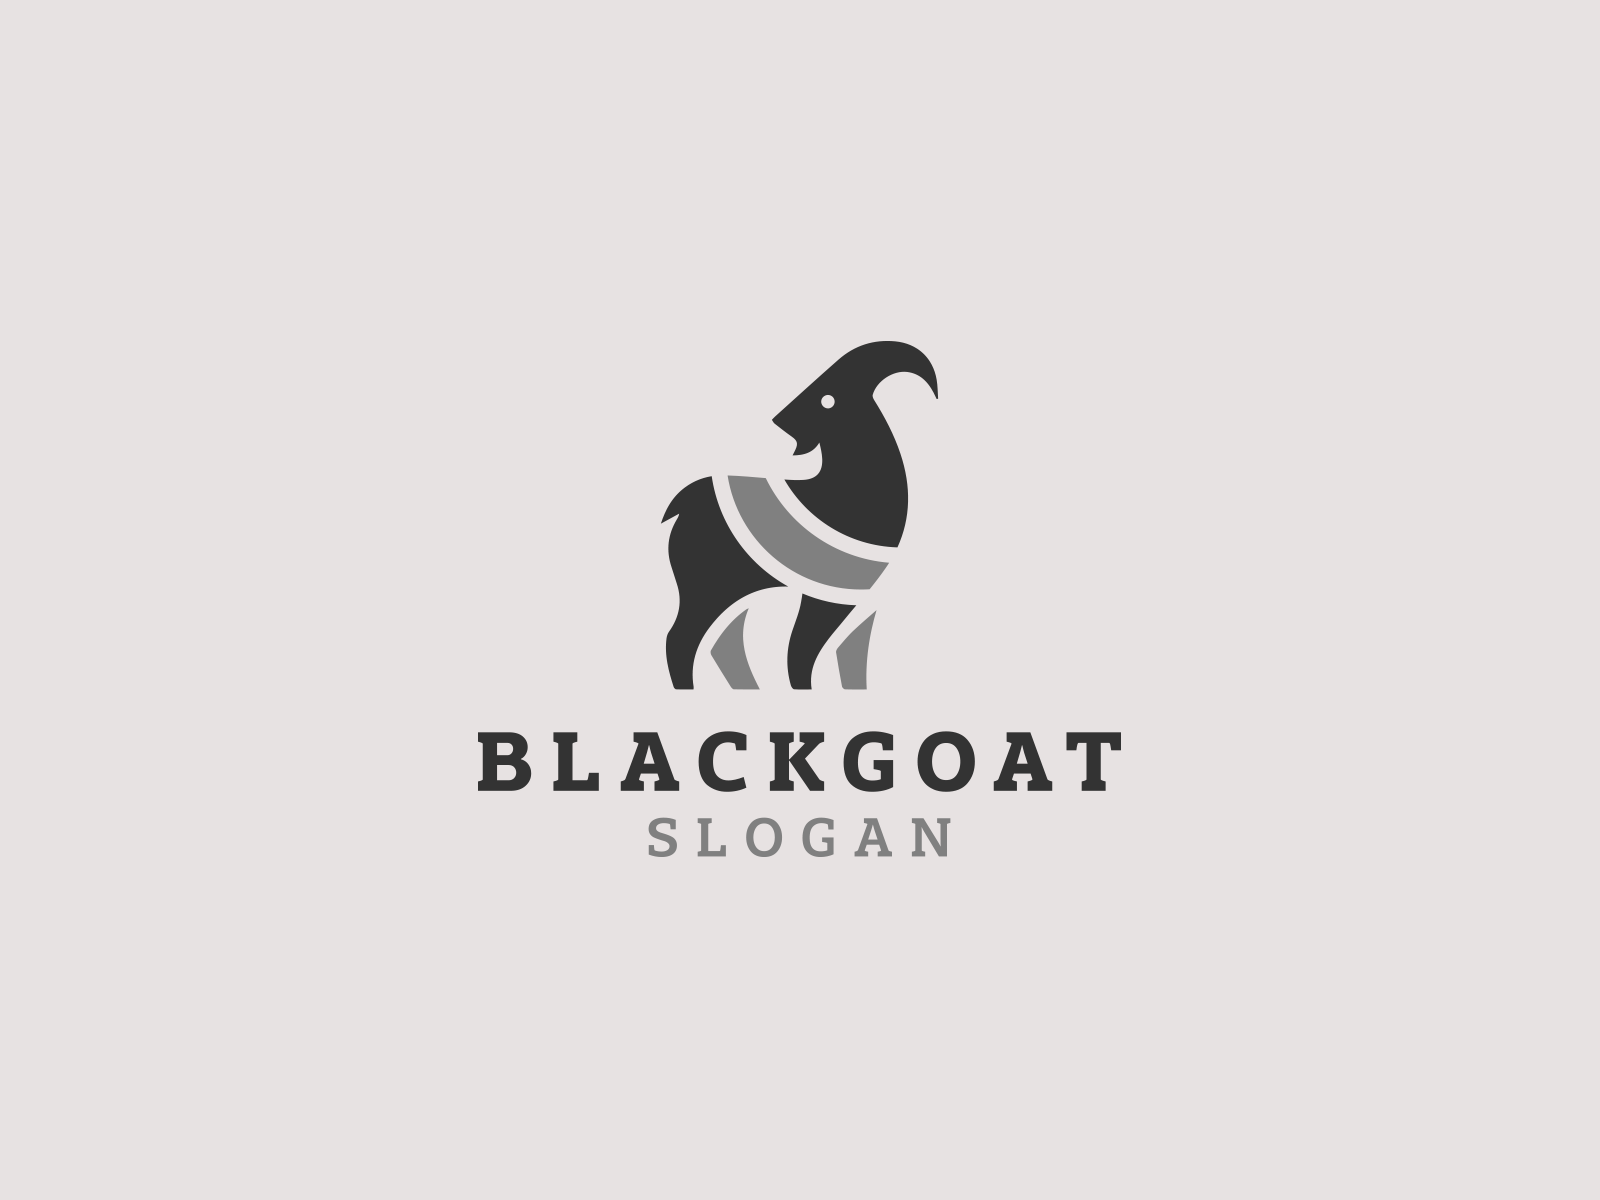 D2C rollup ecommerce startup GOAT Brand Labs accquired Imara -  StartupNews.fyi